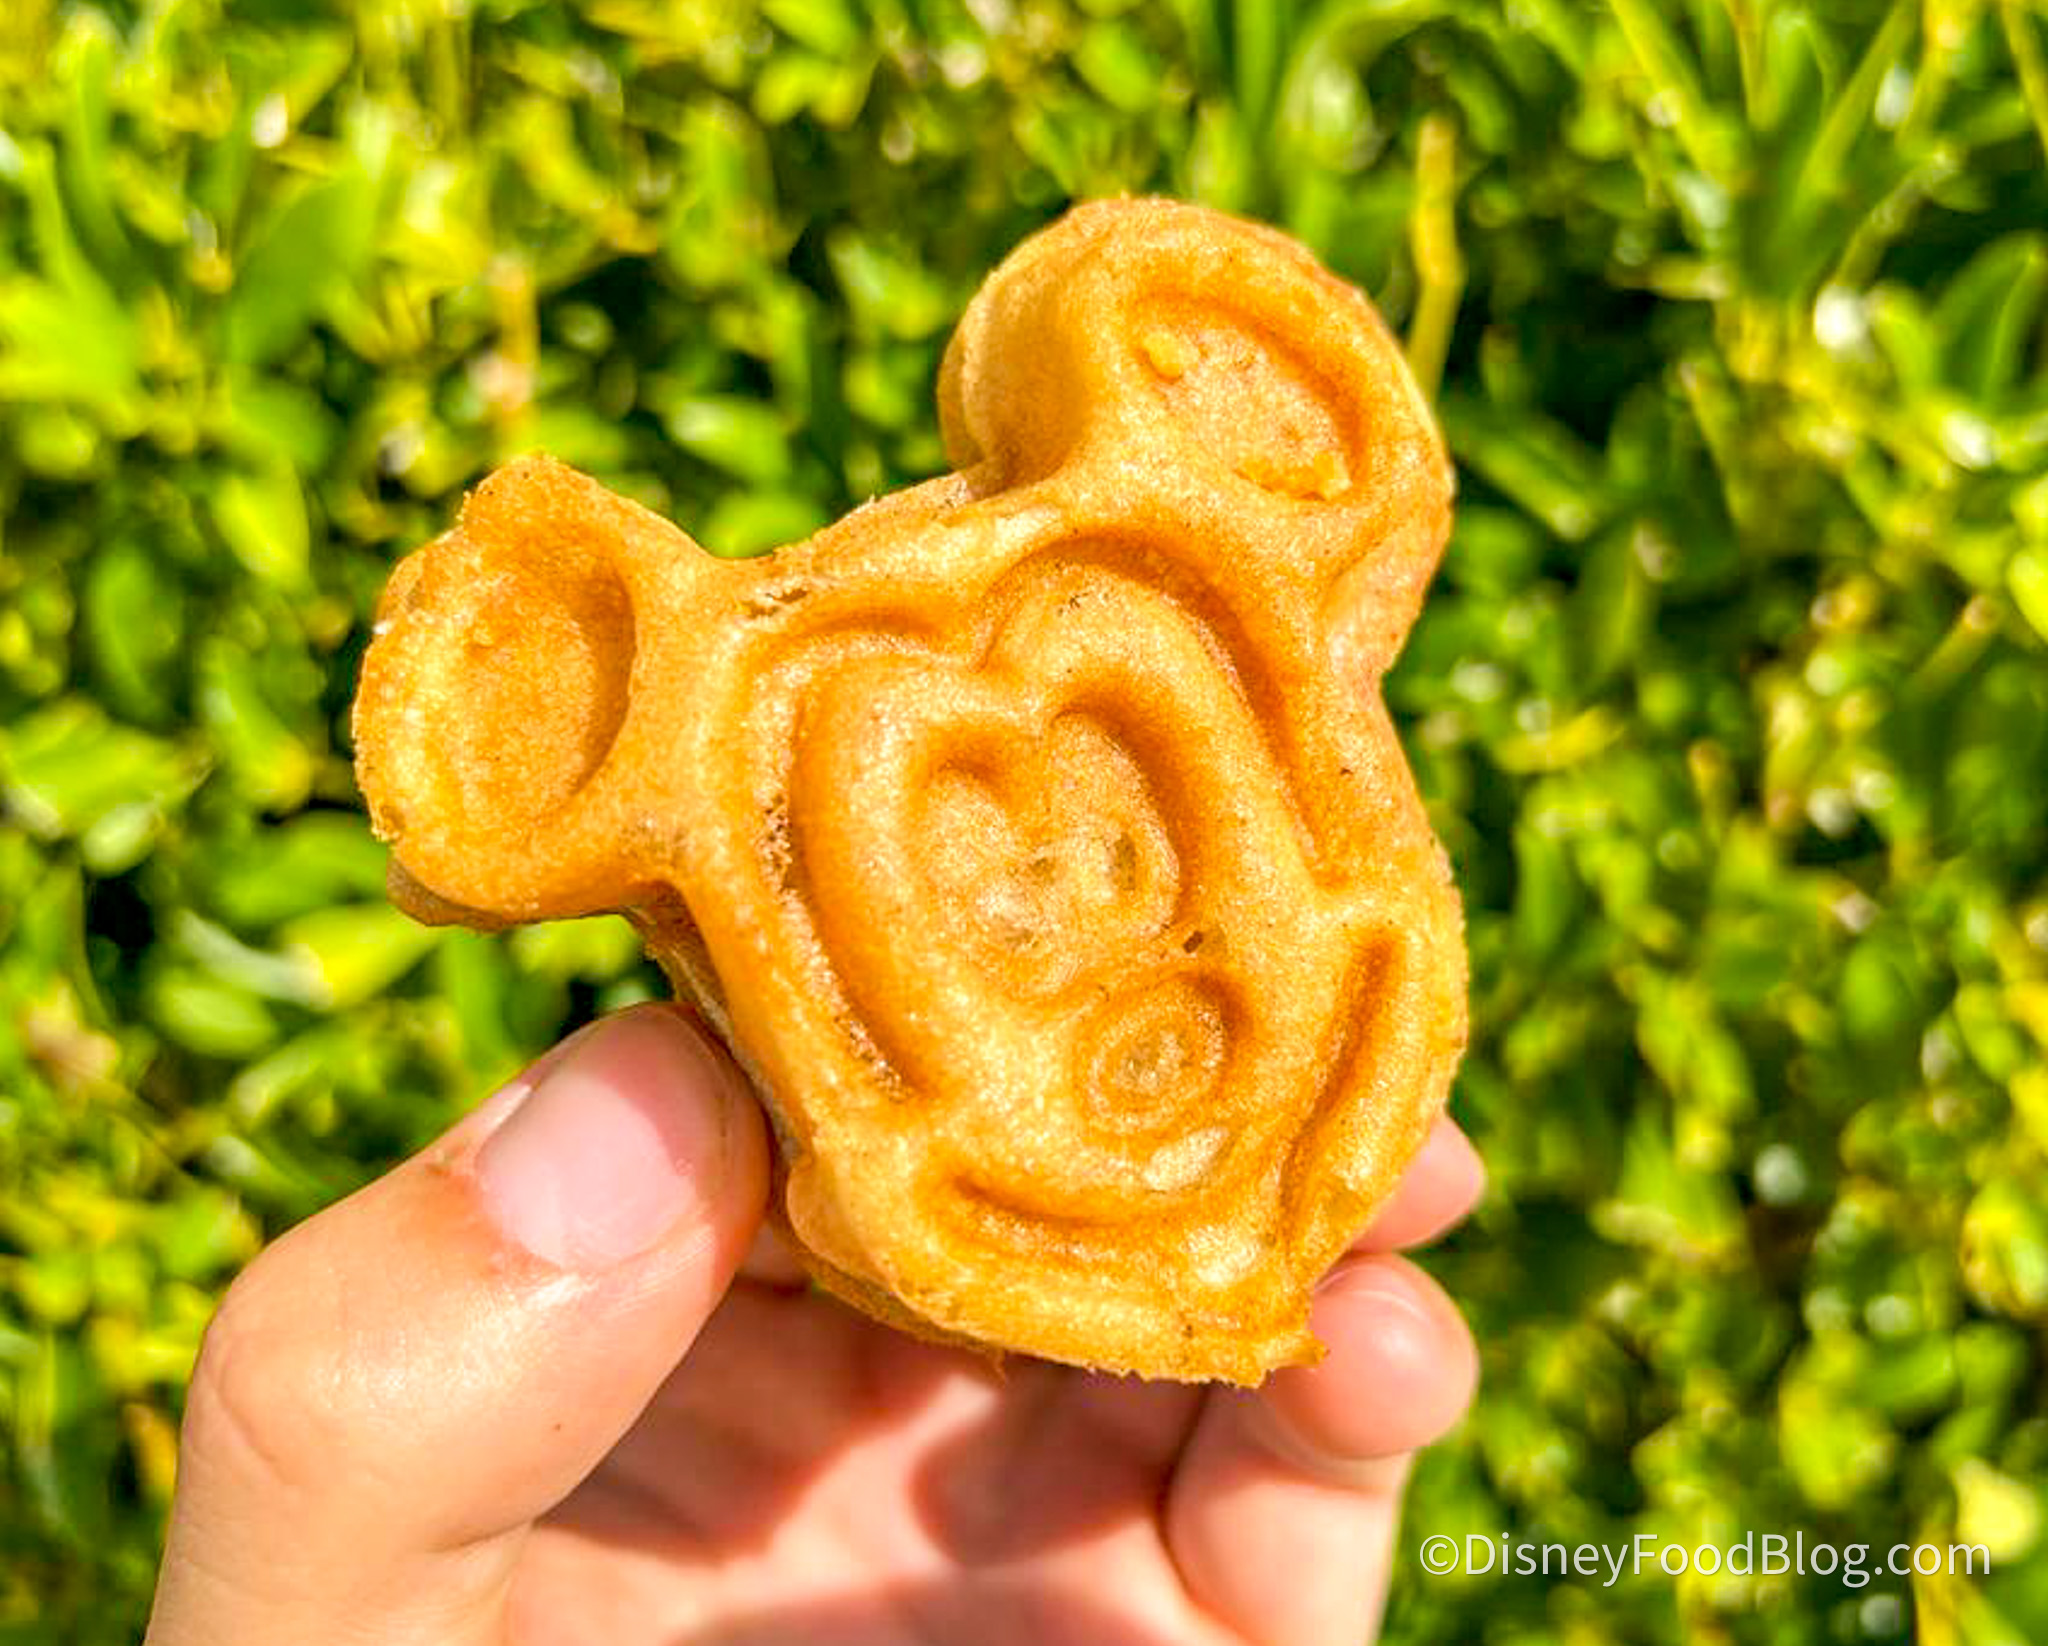 The Stitch Waffles 🧇 is Better Than a Mickey Waffle. Case Closed. #mi